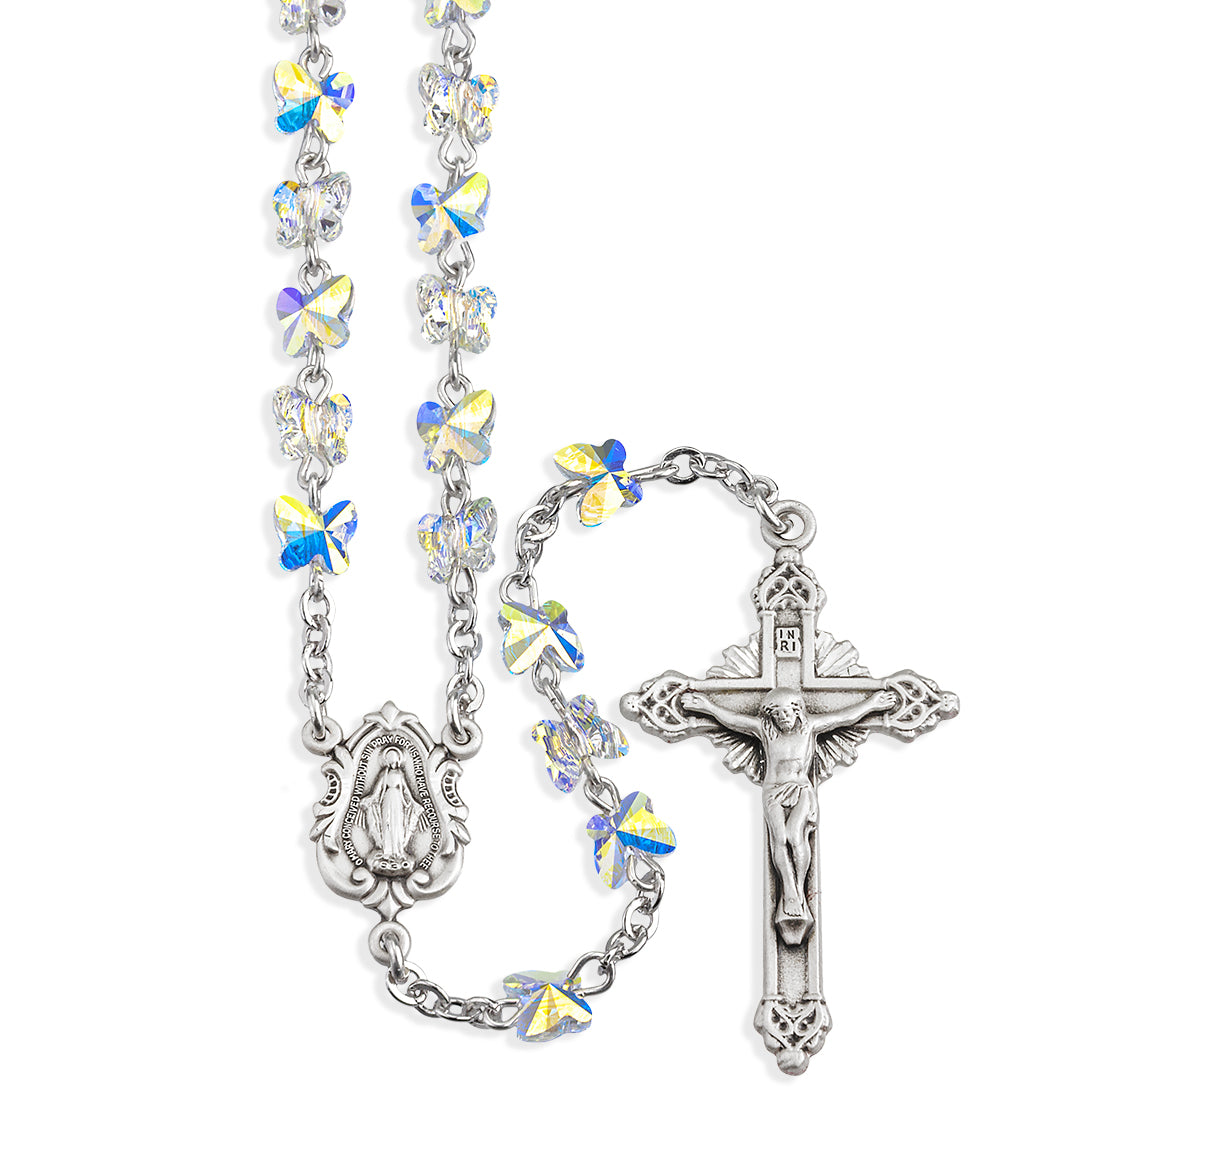 Sterling Silver Rosary Hand Made with 6mm Swarovski Crystal 6mm Aurora Borealis Butterfly Beads by HMH